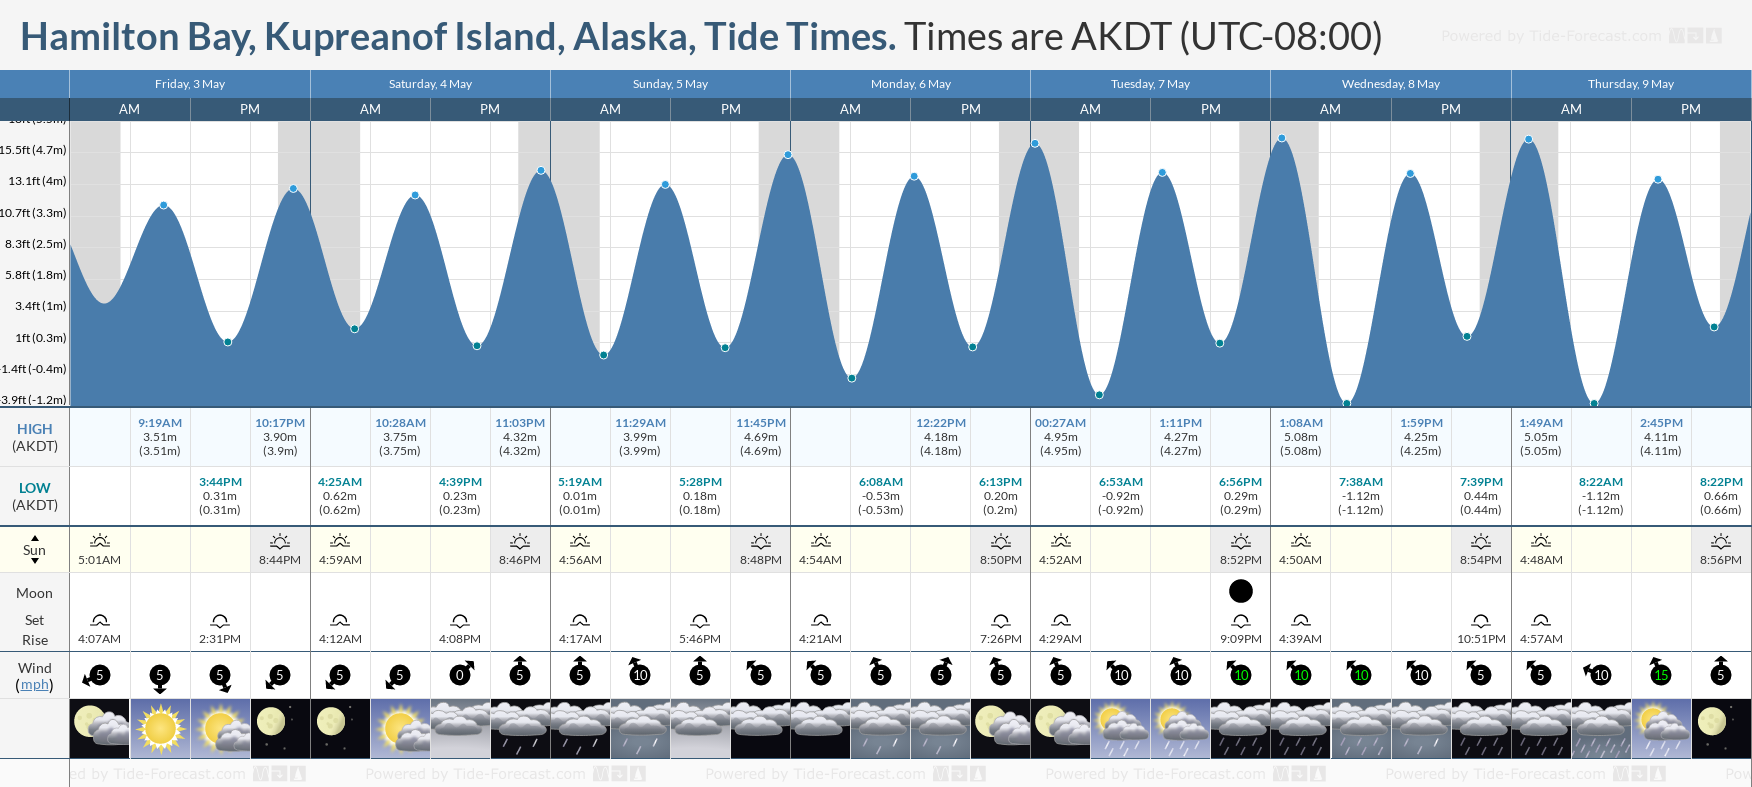 Hamilton Bay, Kupreanof Island, Alaska Tide Chart including high and low tide tide times for the next 7 days